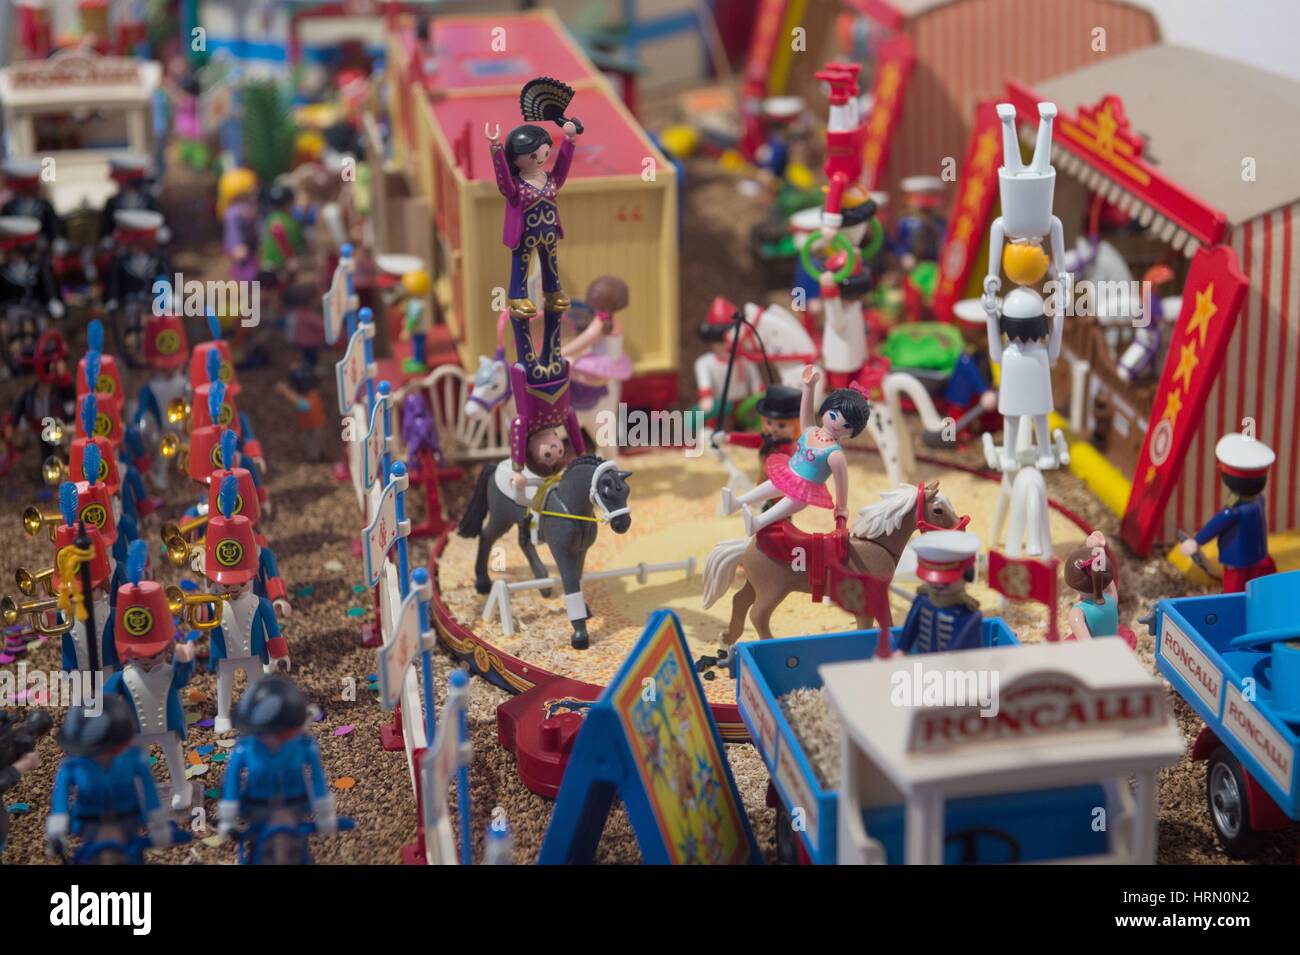 Playmobil figures on in Drebach, Germany, 01 March 2017. The exhibition, entitled 'Playmobil Circus Stories: The Oliver Schaffer Collection', is open to the public between the 04 March 2017 and the